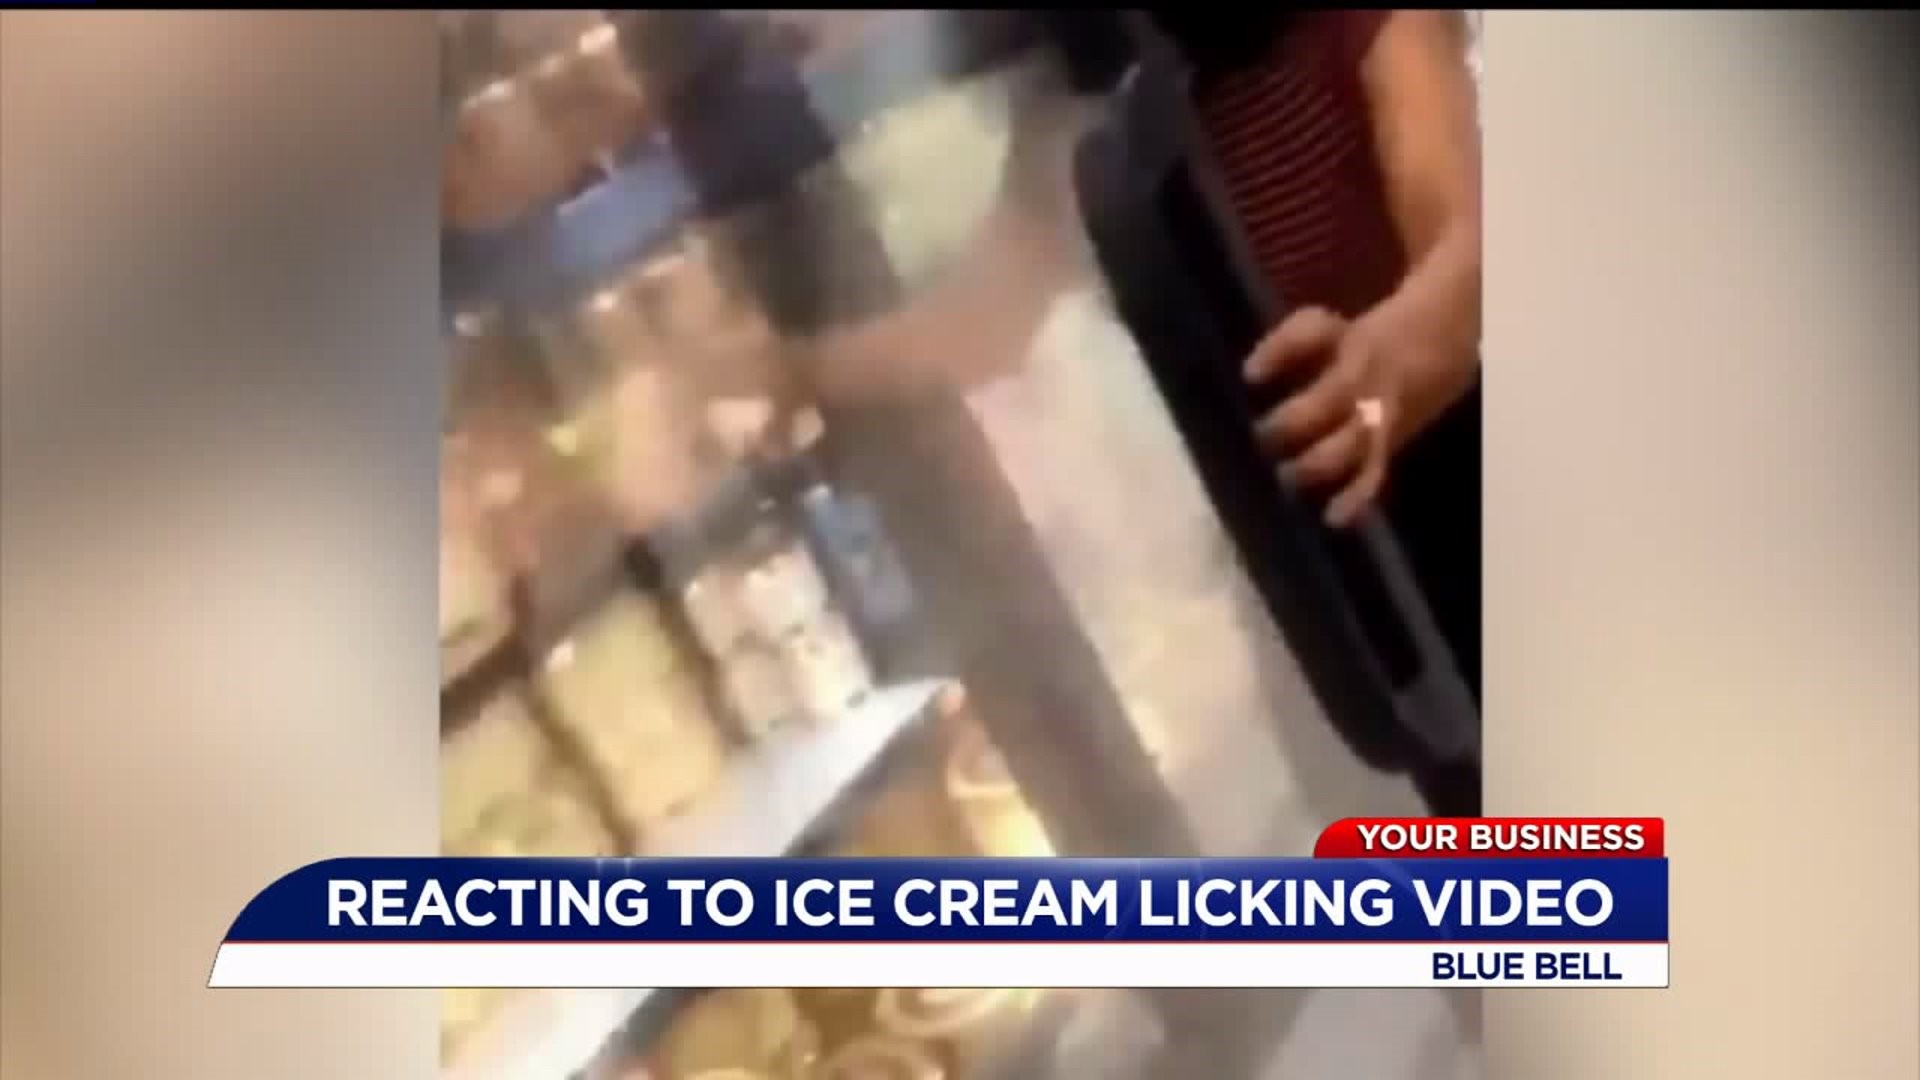 Blue Bell responds to viral video of woman licking ice cream, returning it to freezer